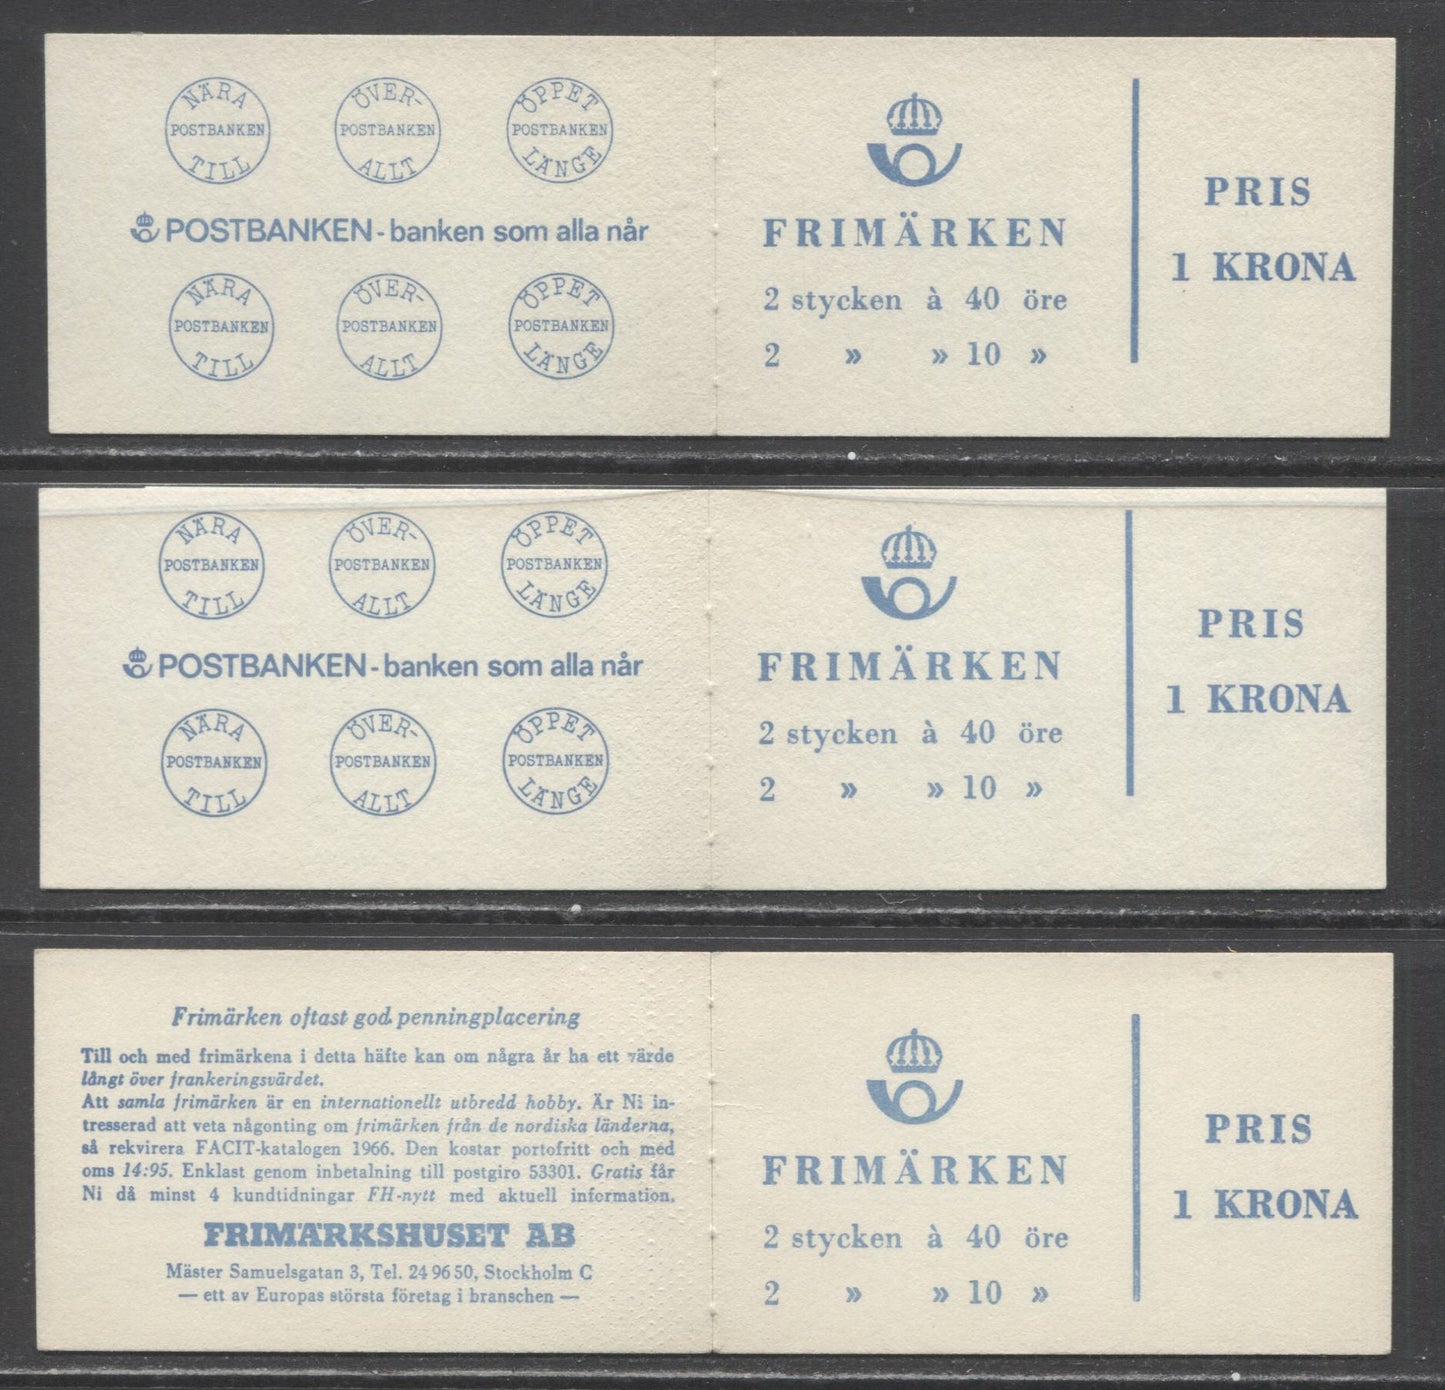 Lot 194 Sweden SC#669b (Facit #HA12ARV/HA12B1RV) 1964 Re-Engraved King Gustav VI Adolf Definitive Issue, Different Back Cover Designs, Upright & Inverted Panes, 10 Ore Stamps At left and Right, 6 VFNH Booklets of 4 (2 +2), Estimated Value $22